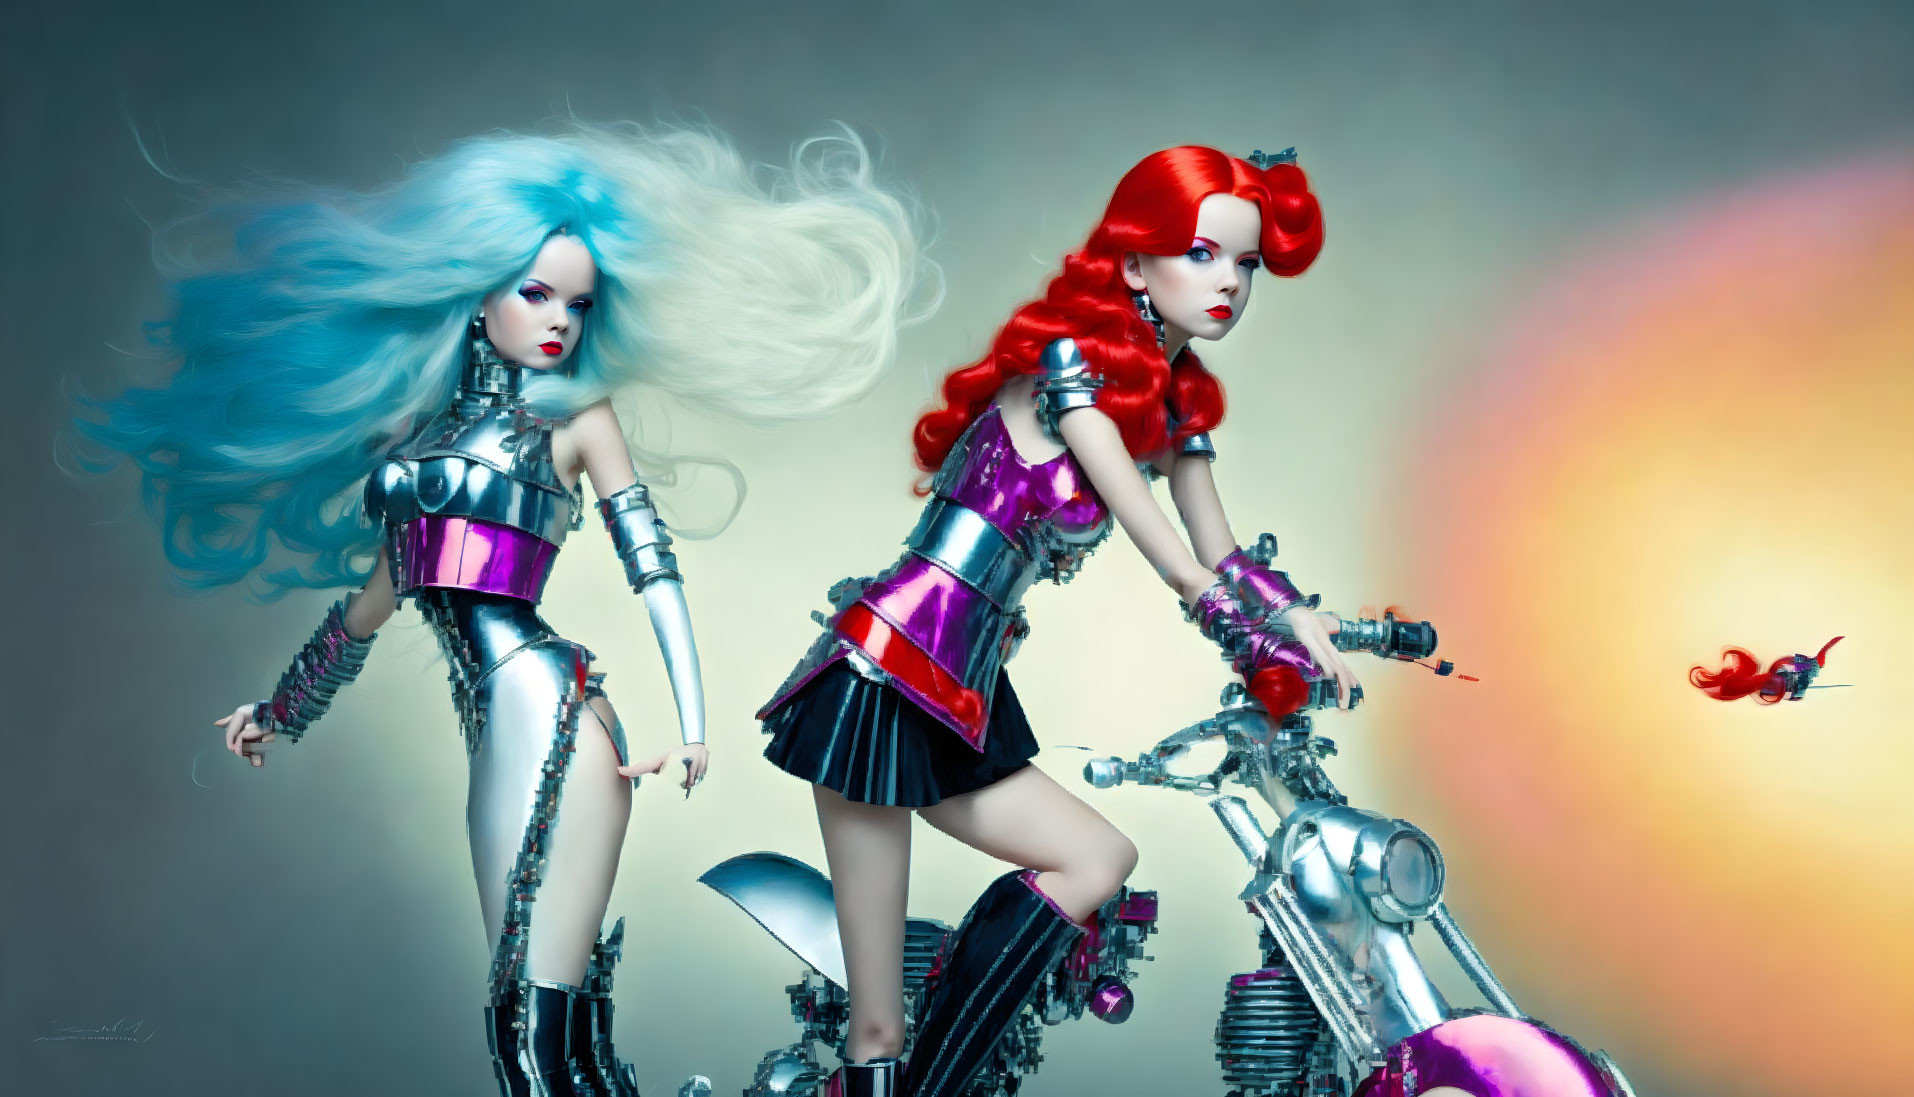 Futuristic female figures with vibrant hair on motorcycle with bird background